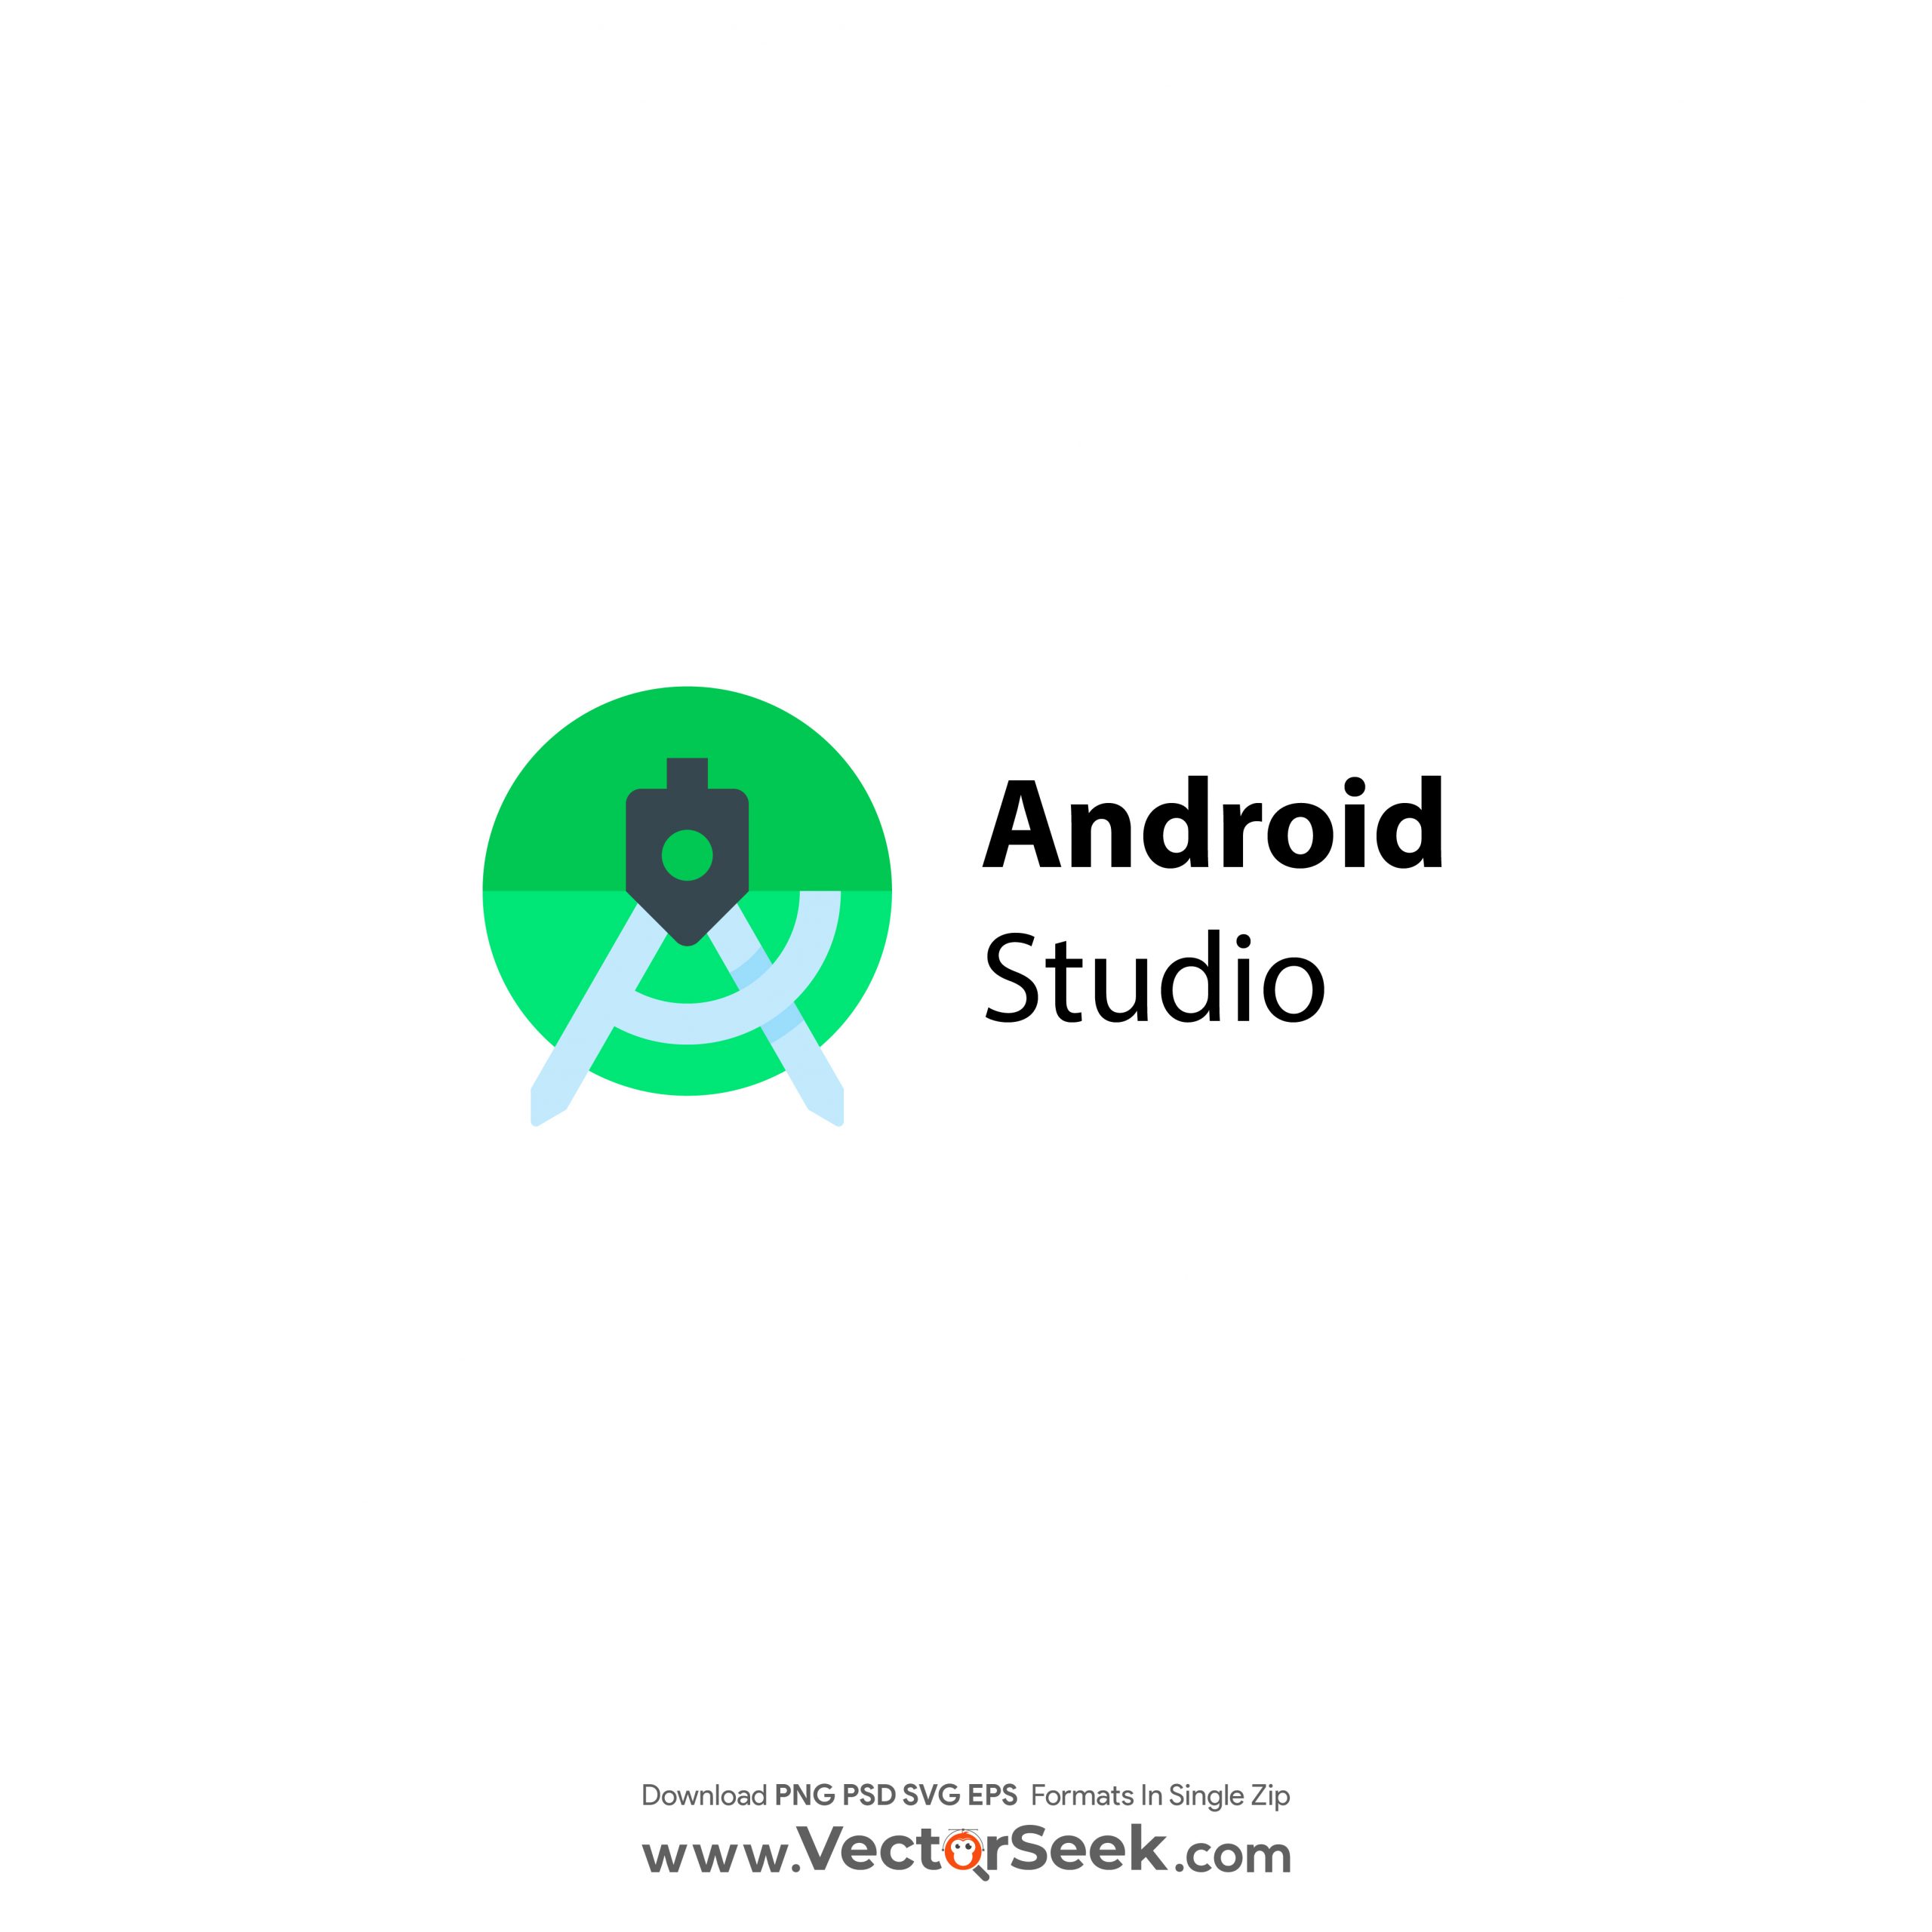 Android Studio Logo Vector - (.Ai .PNG .SVG .EPS Free Download)